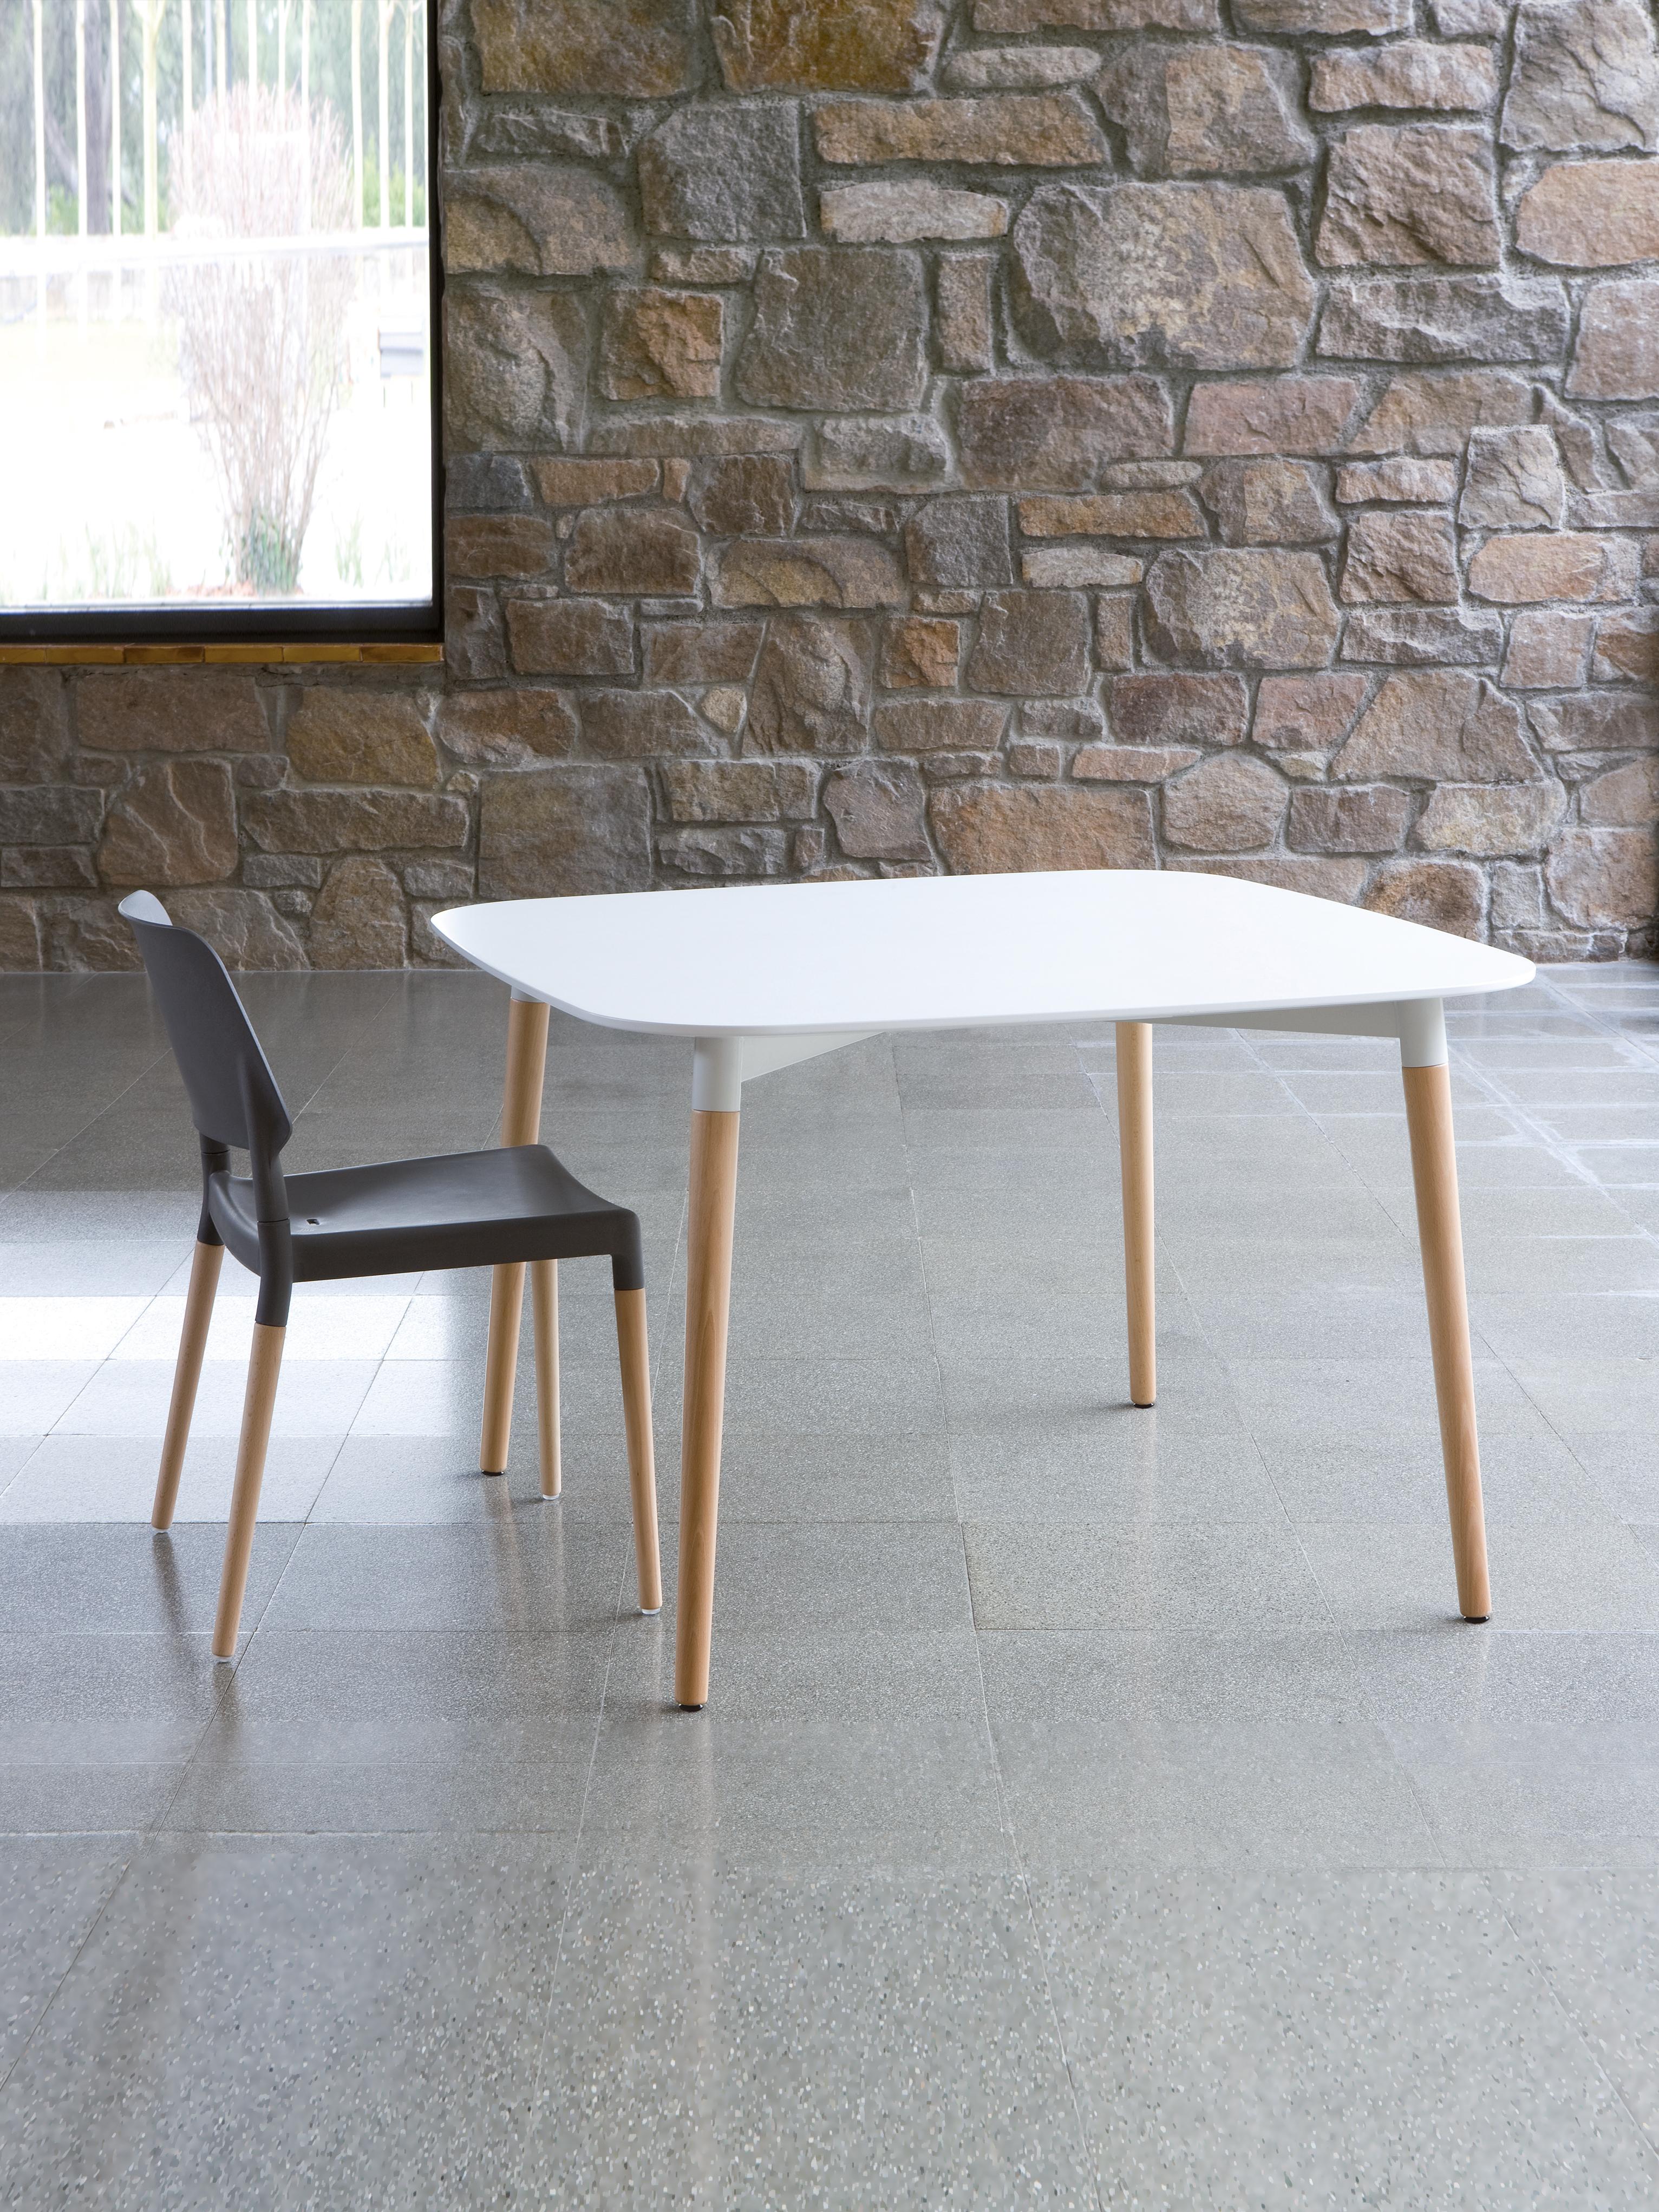 Belloch Cuadrada table by Lagranja Design
Dimensions: D 110 x W 110 x H 73 cm
Materials: Metal, beech wood.
Available in 2 sizes: D110 x W 110, D110x W180 cm.

The Belloch is a large, comfortable table whose laminate top features rounded corners and